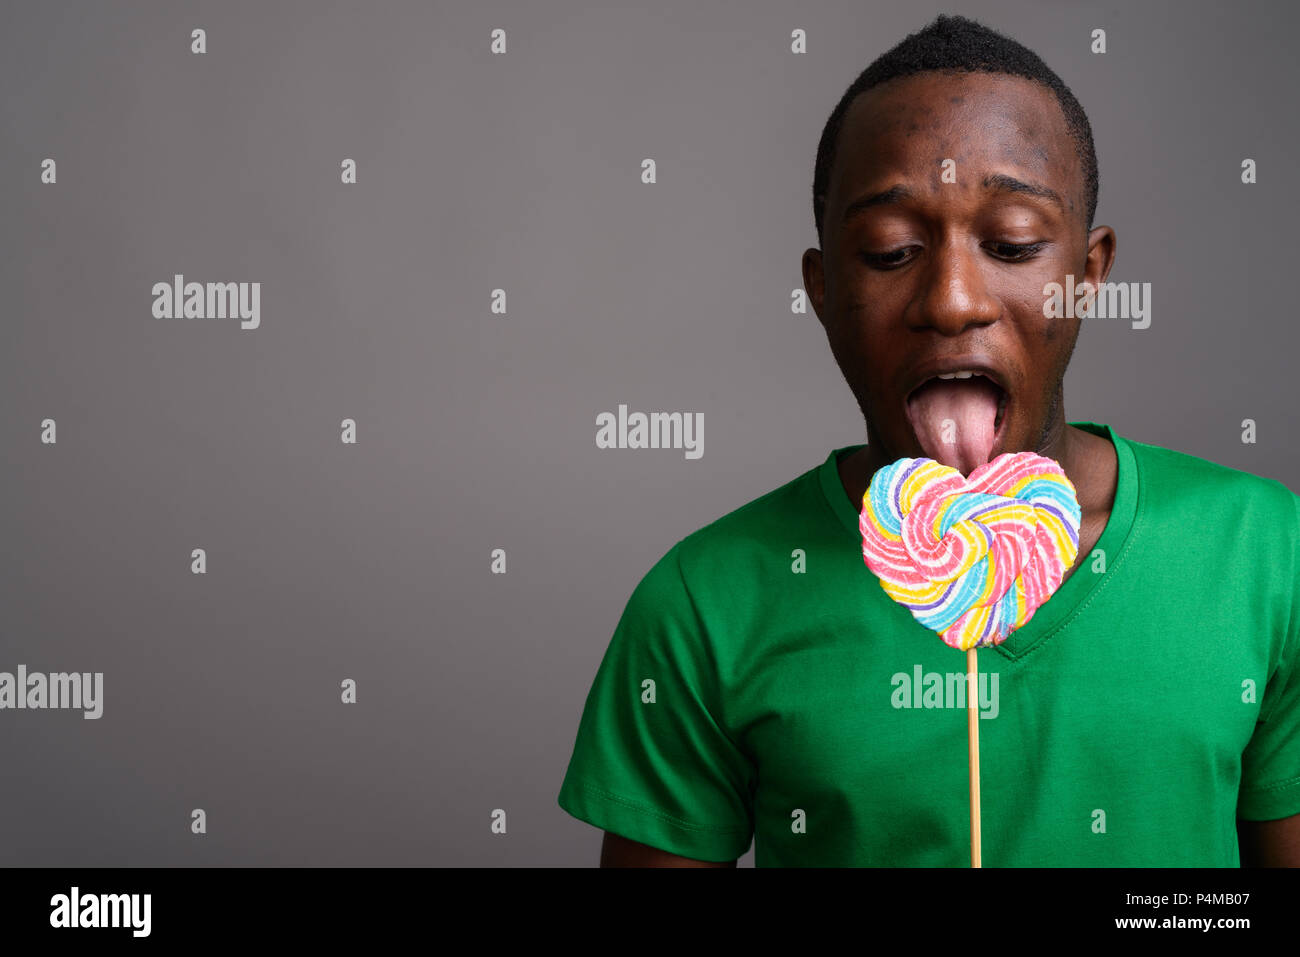 Young African man wearing green shirt against gray background Stock Photo